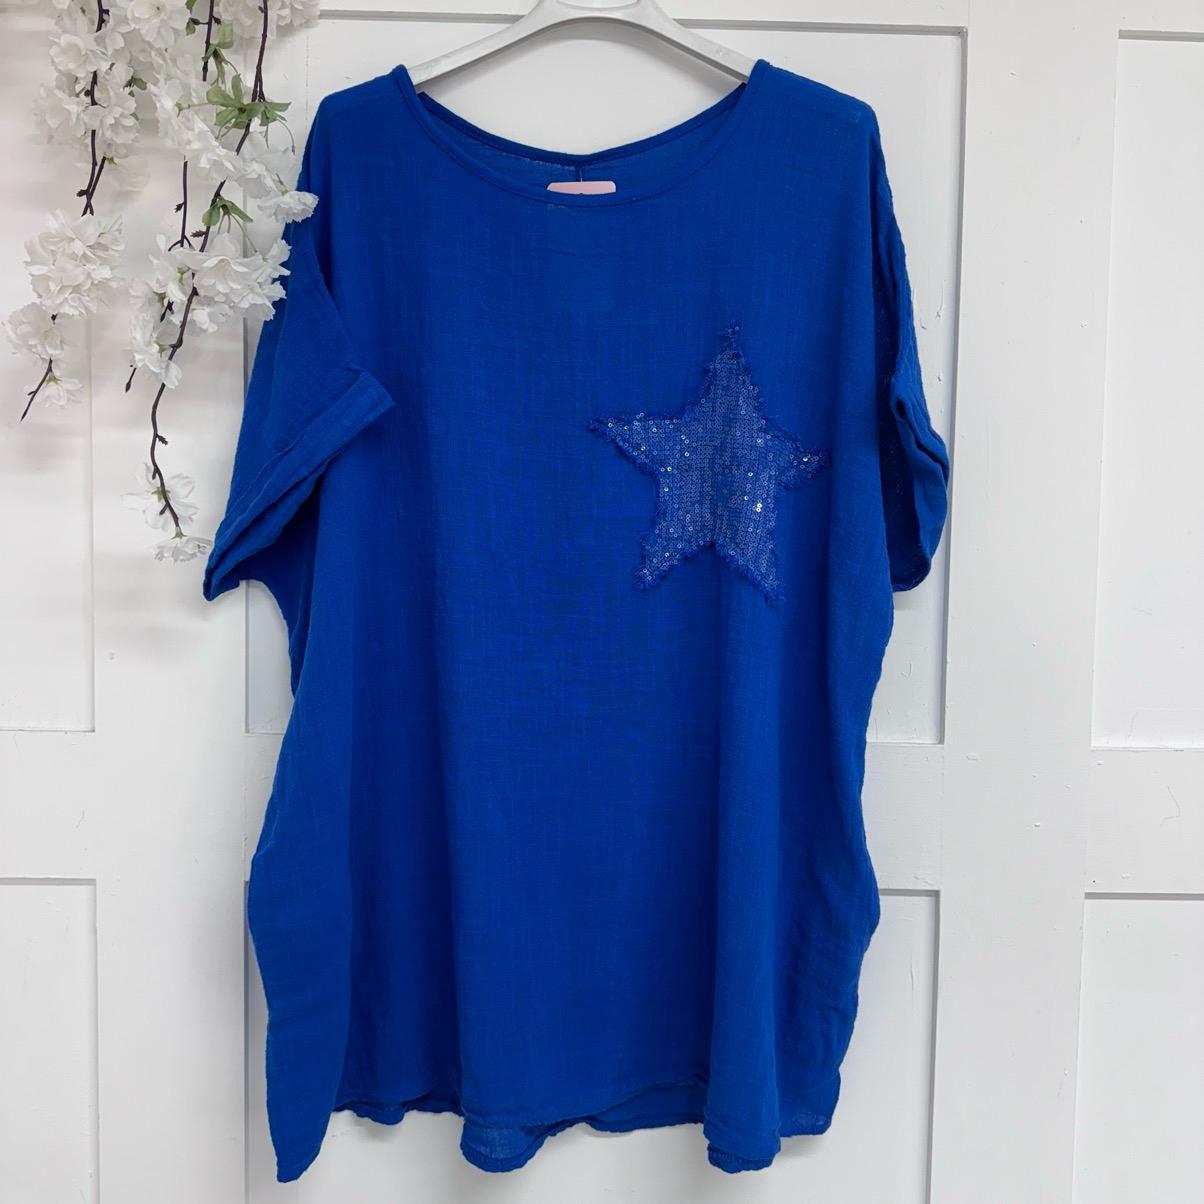 Nina: Cotton sequin star top with pockets. One Size 14-22